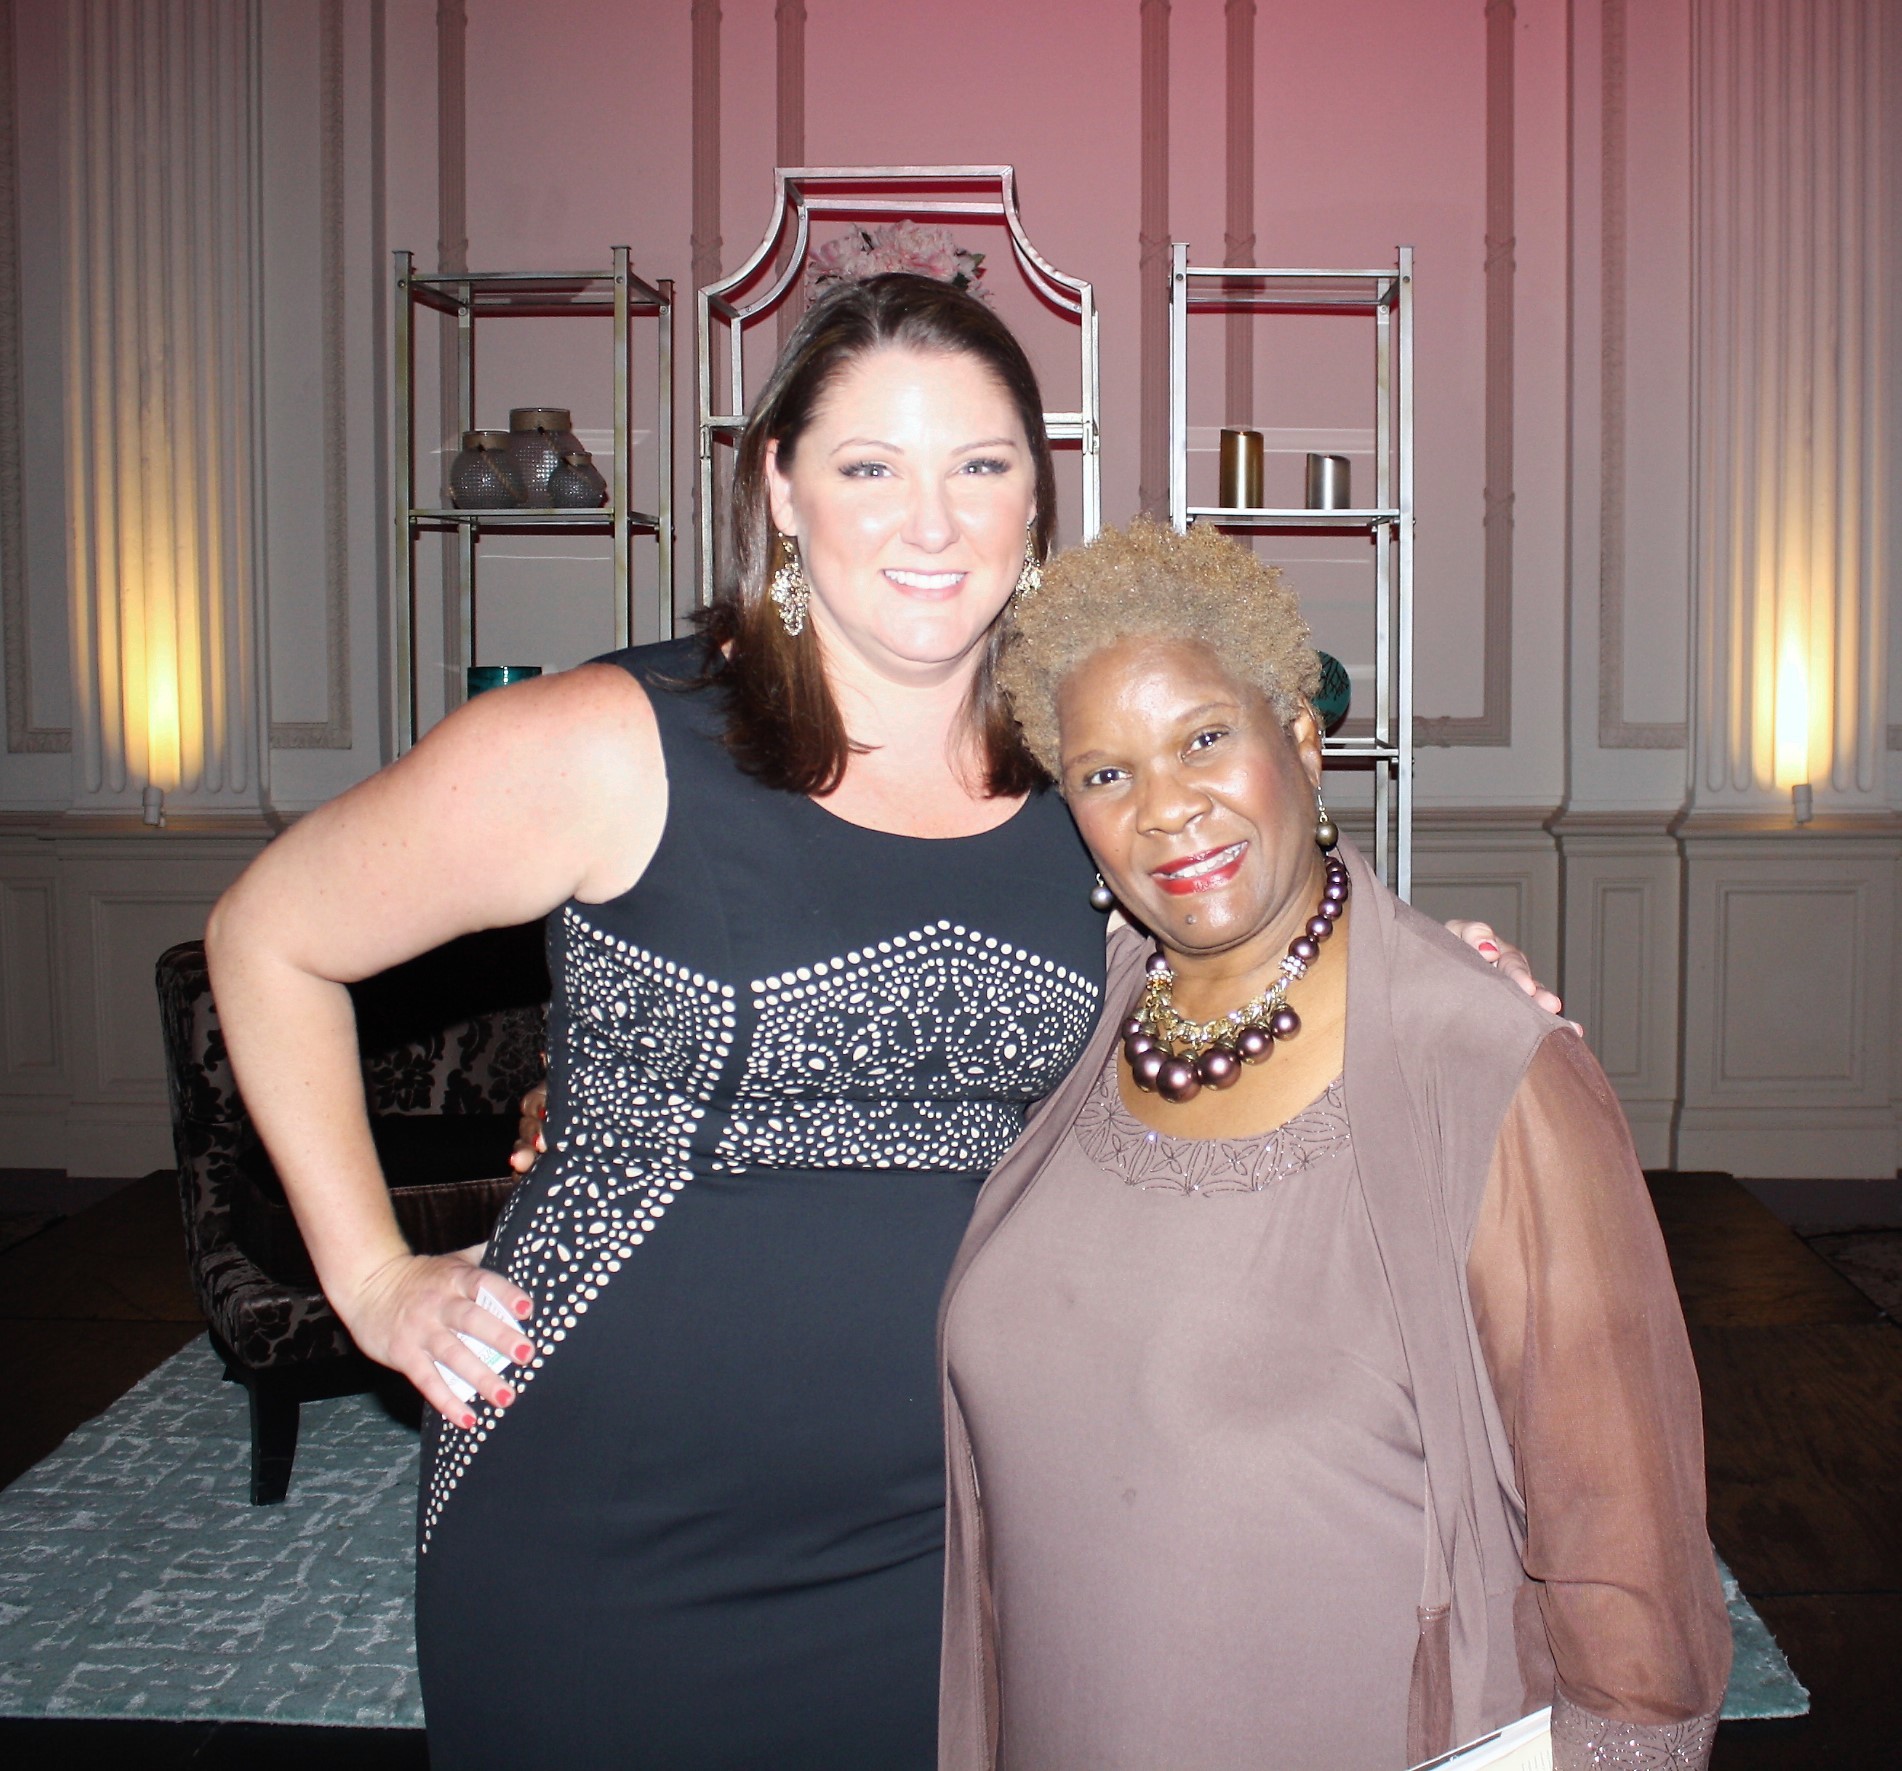 Women’s Wednesdays founder Kelly Youngs and best-selling author Brenda Jackson